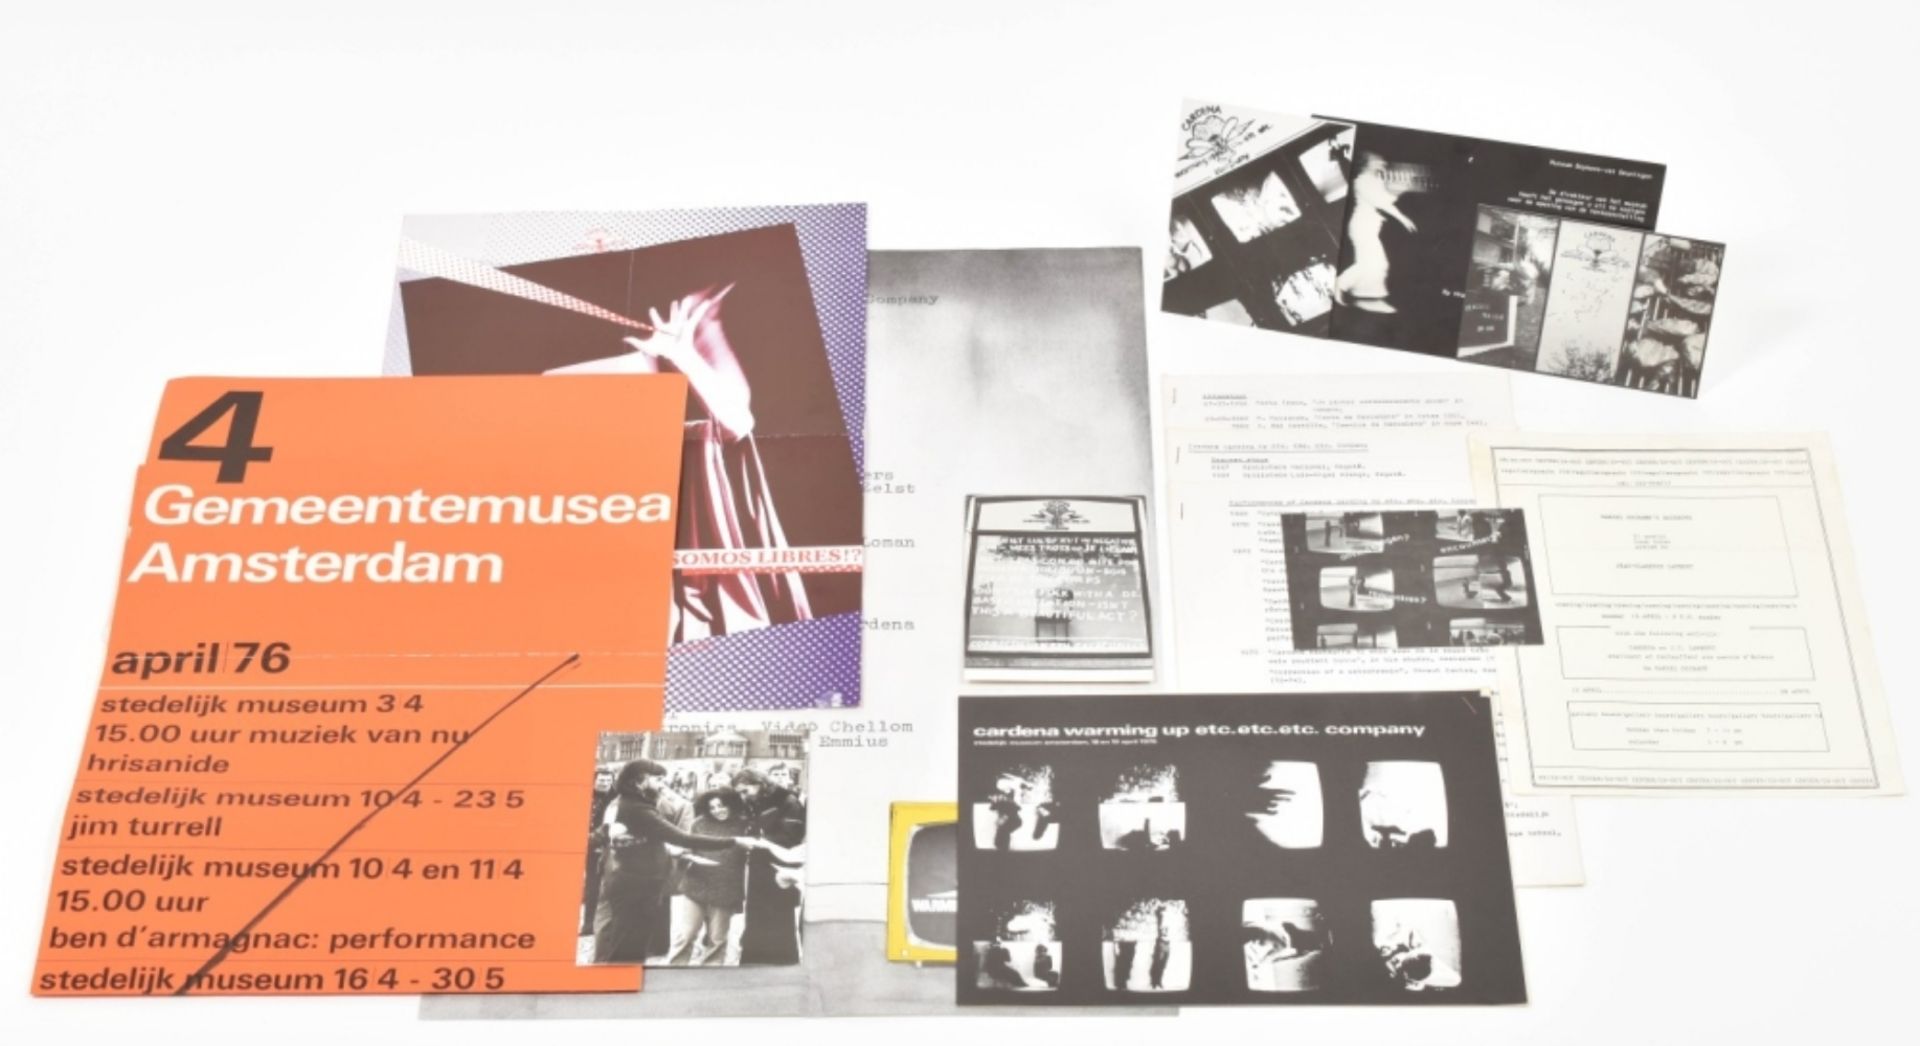 Michel Cardena, ephemera from the 1970s to early 1980s